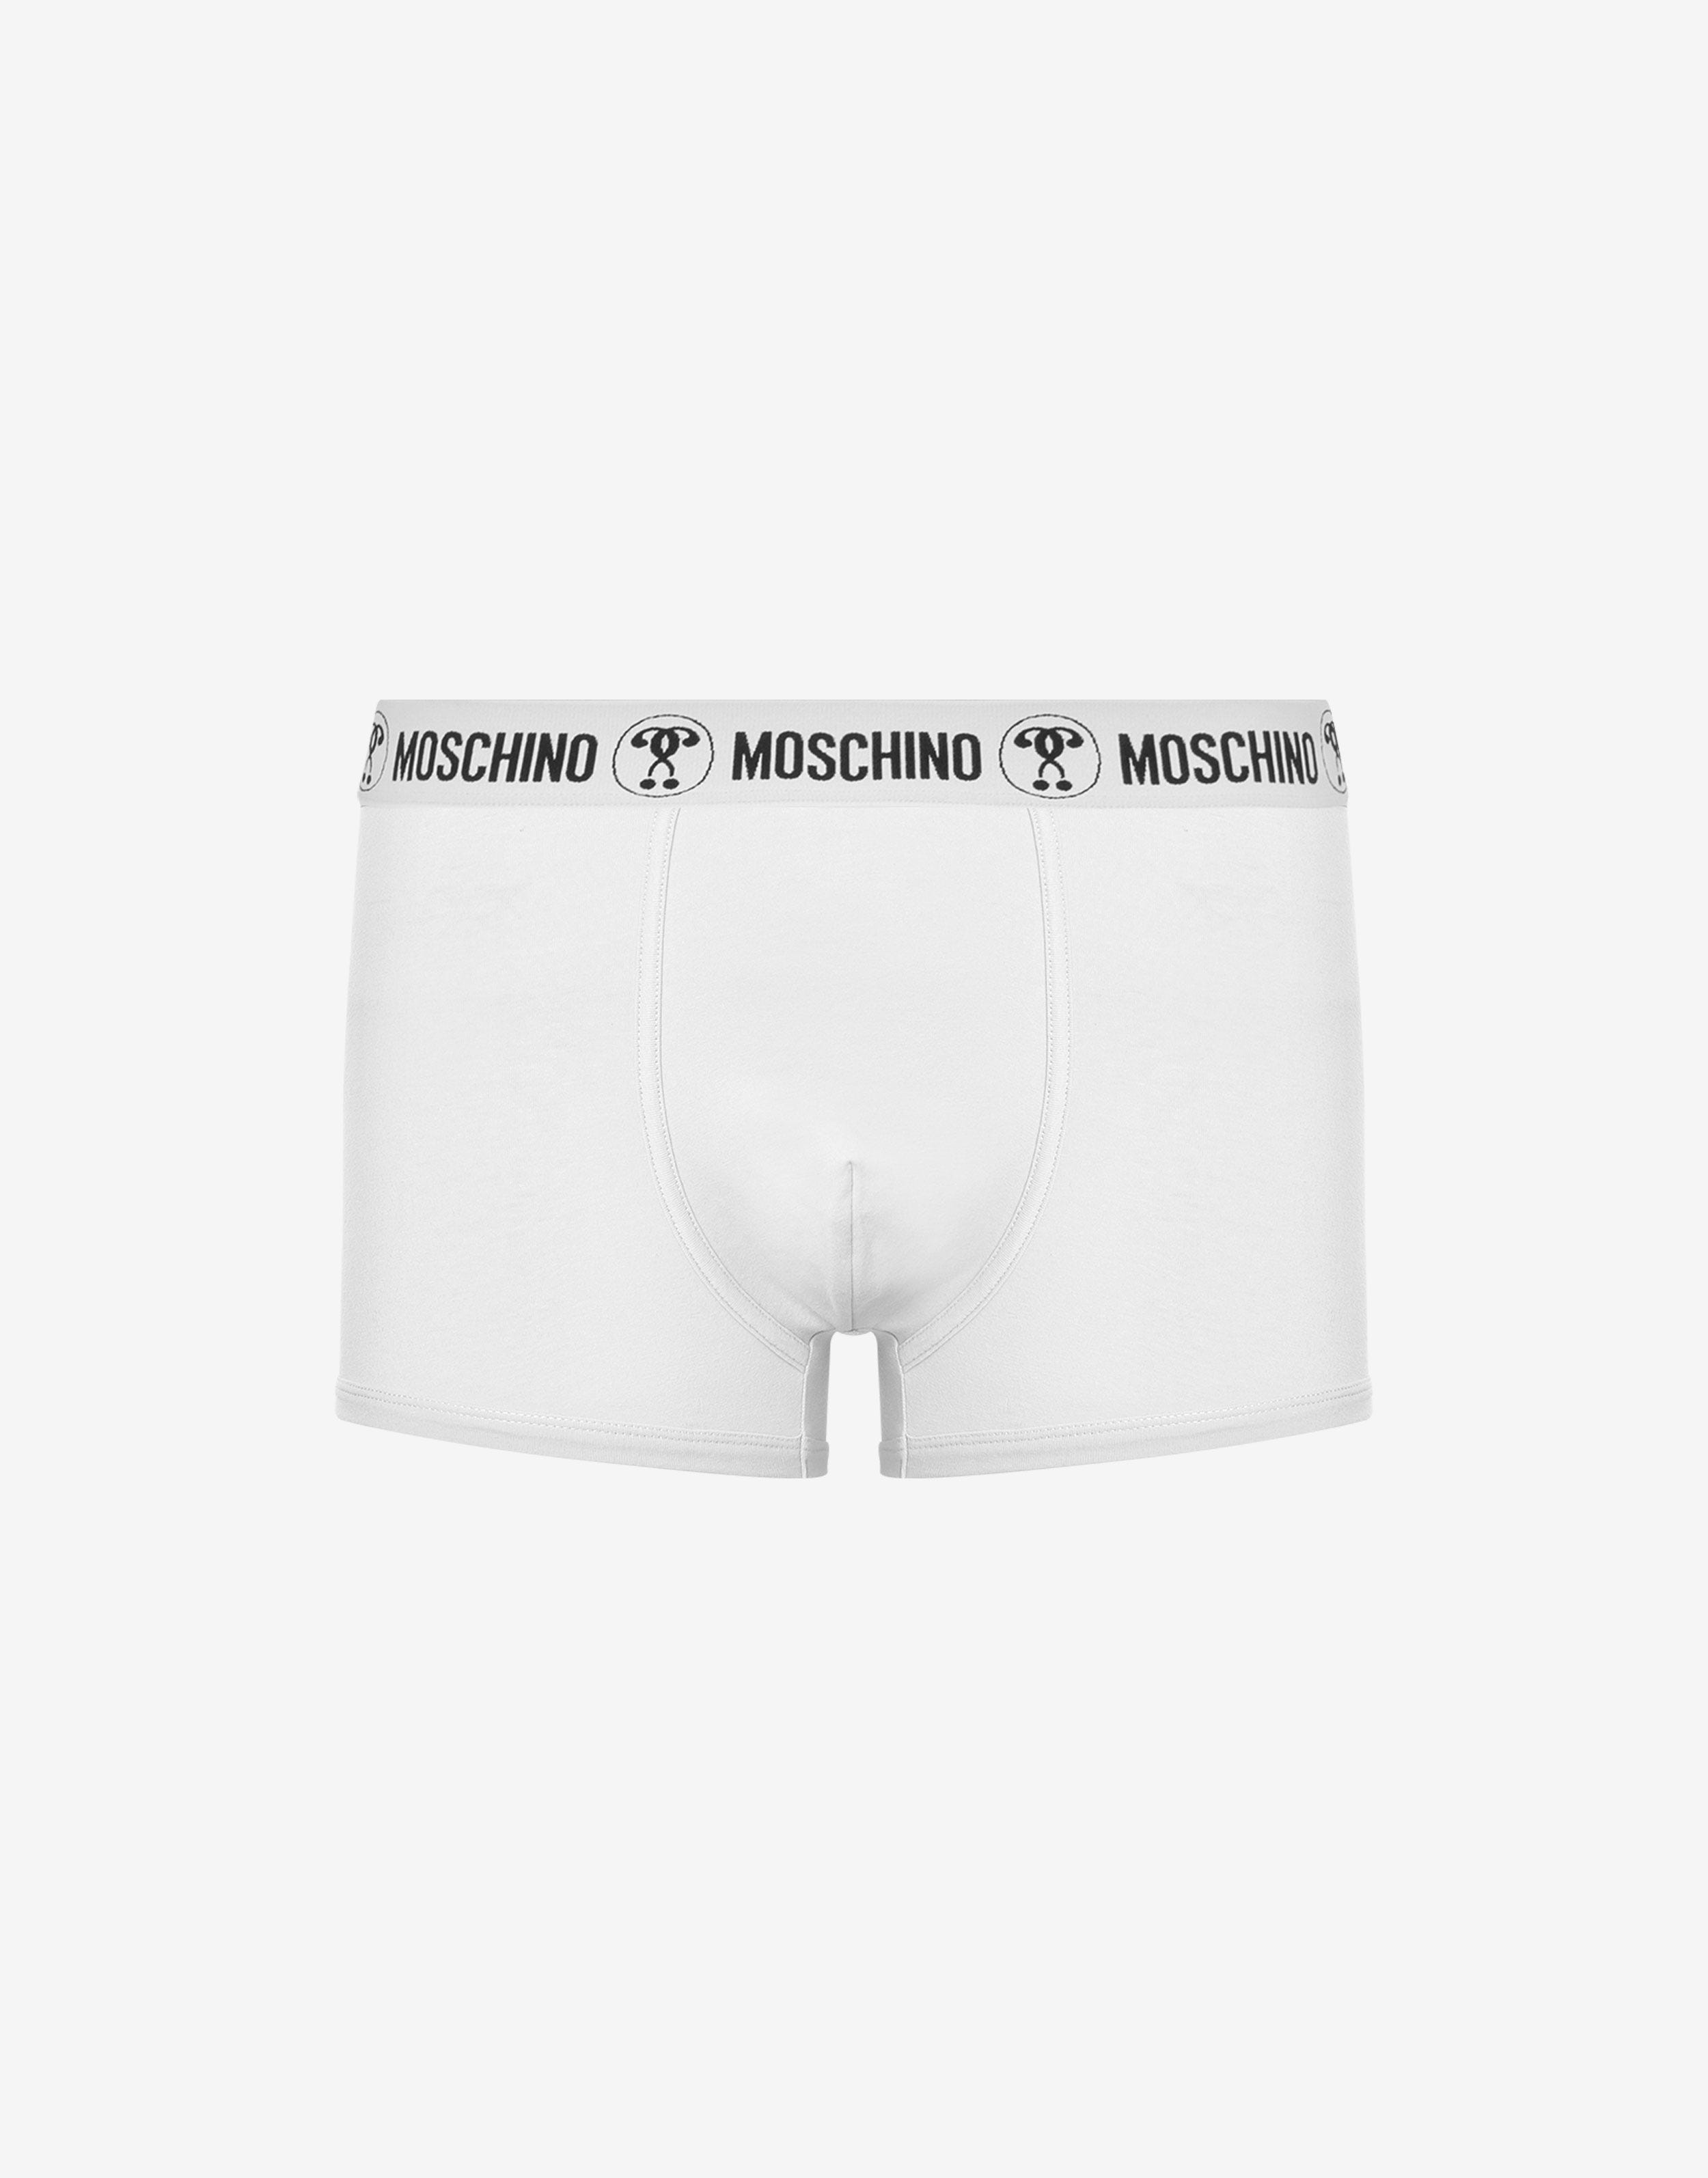 DOUBLE QUESTION MARK JERSEY BOXER - 1